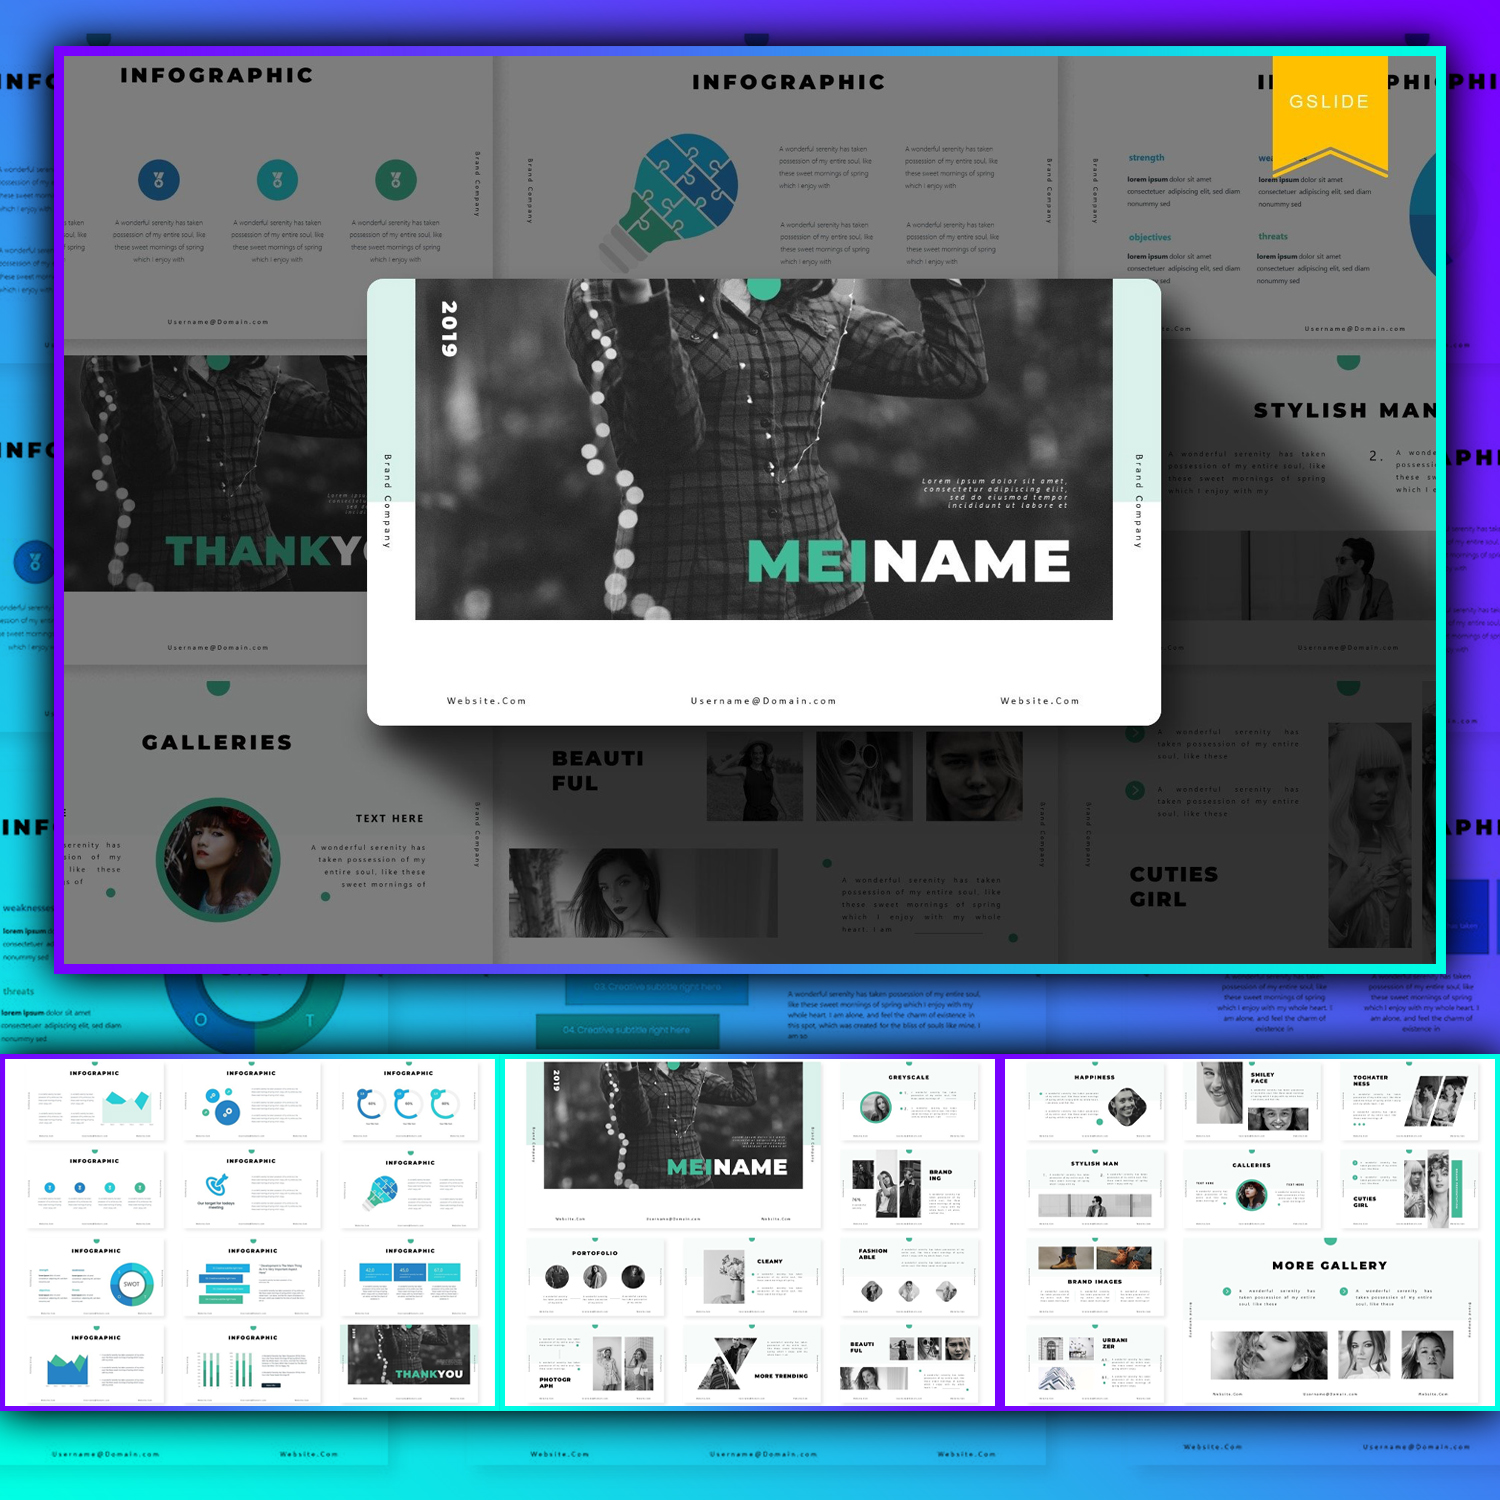 Images preview meiname google slides template.